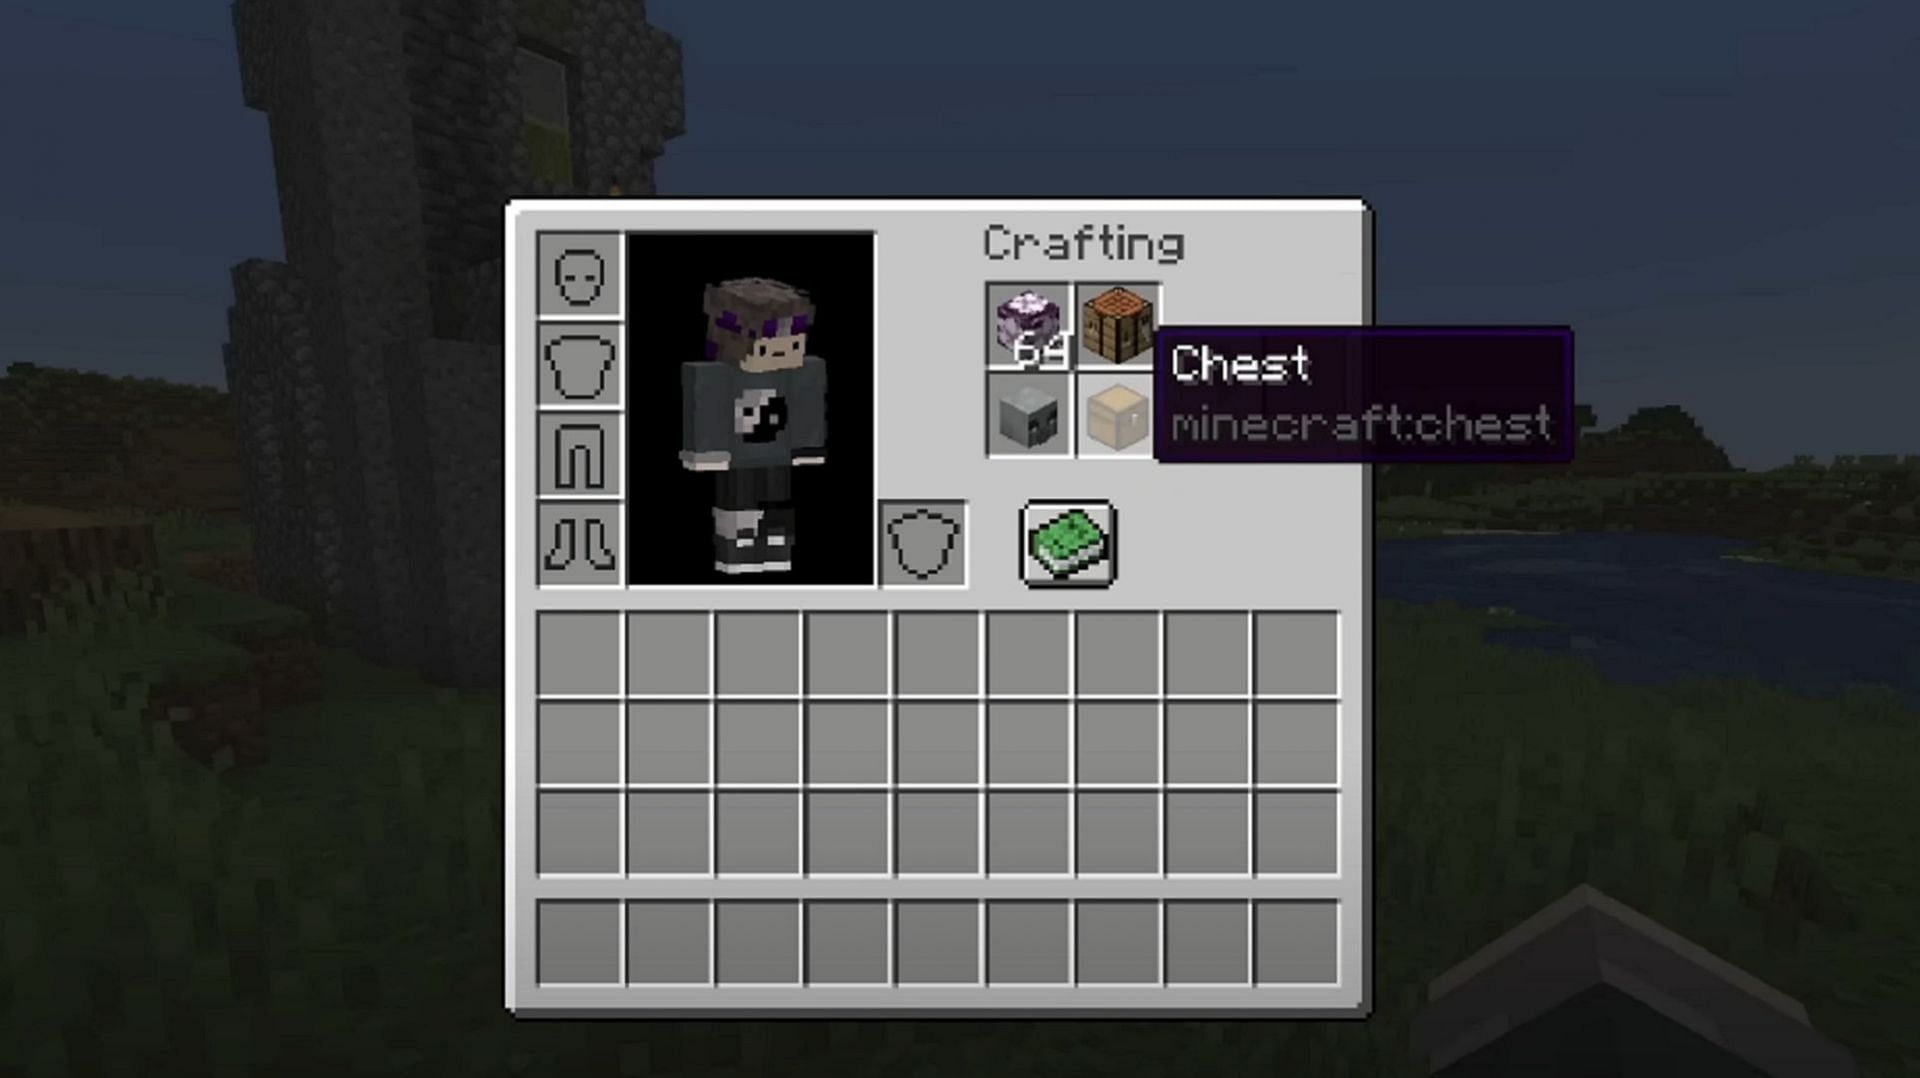 Using Touchscreen Mode can give you extra inventory slots (Image via Wifies/YouTube)